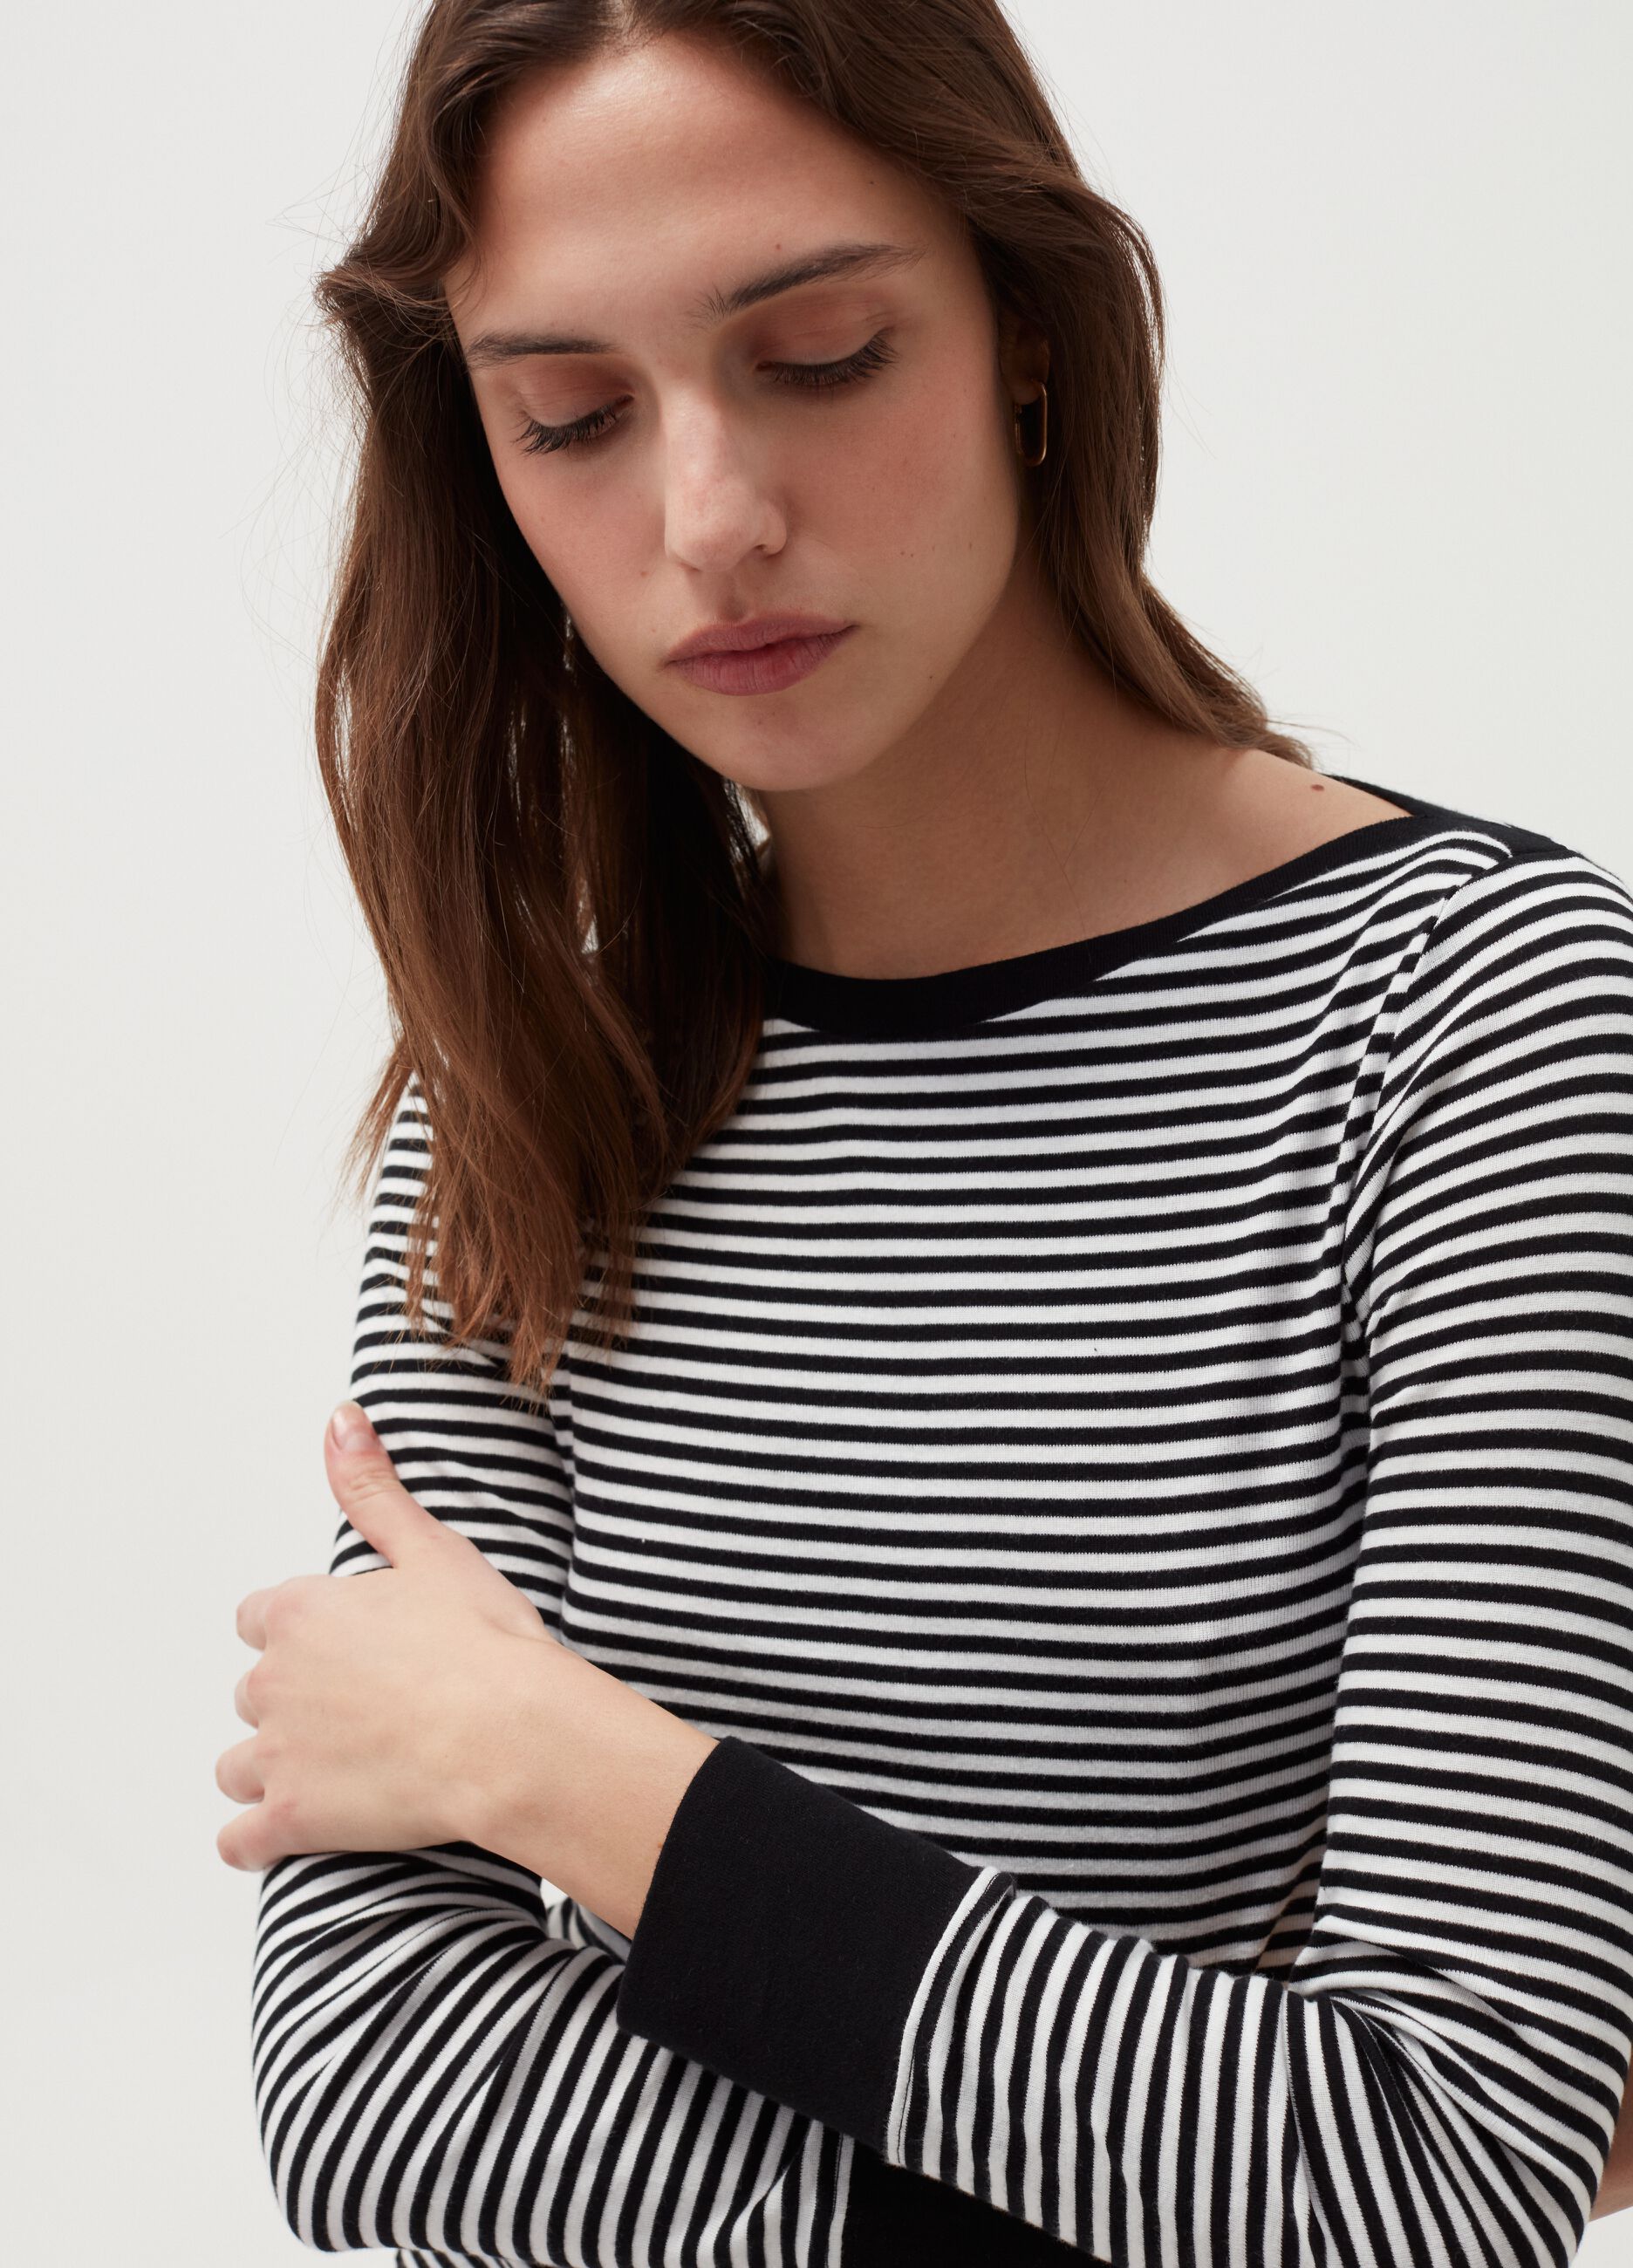 Striped T-shirt with boat neck